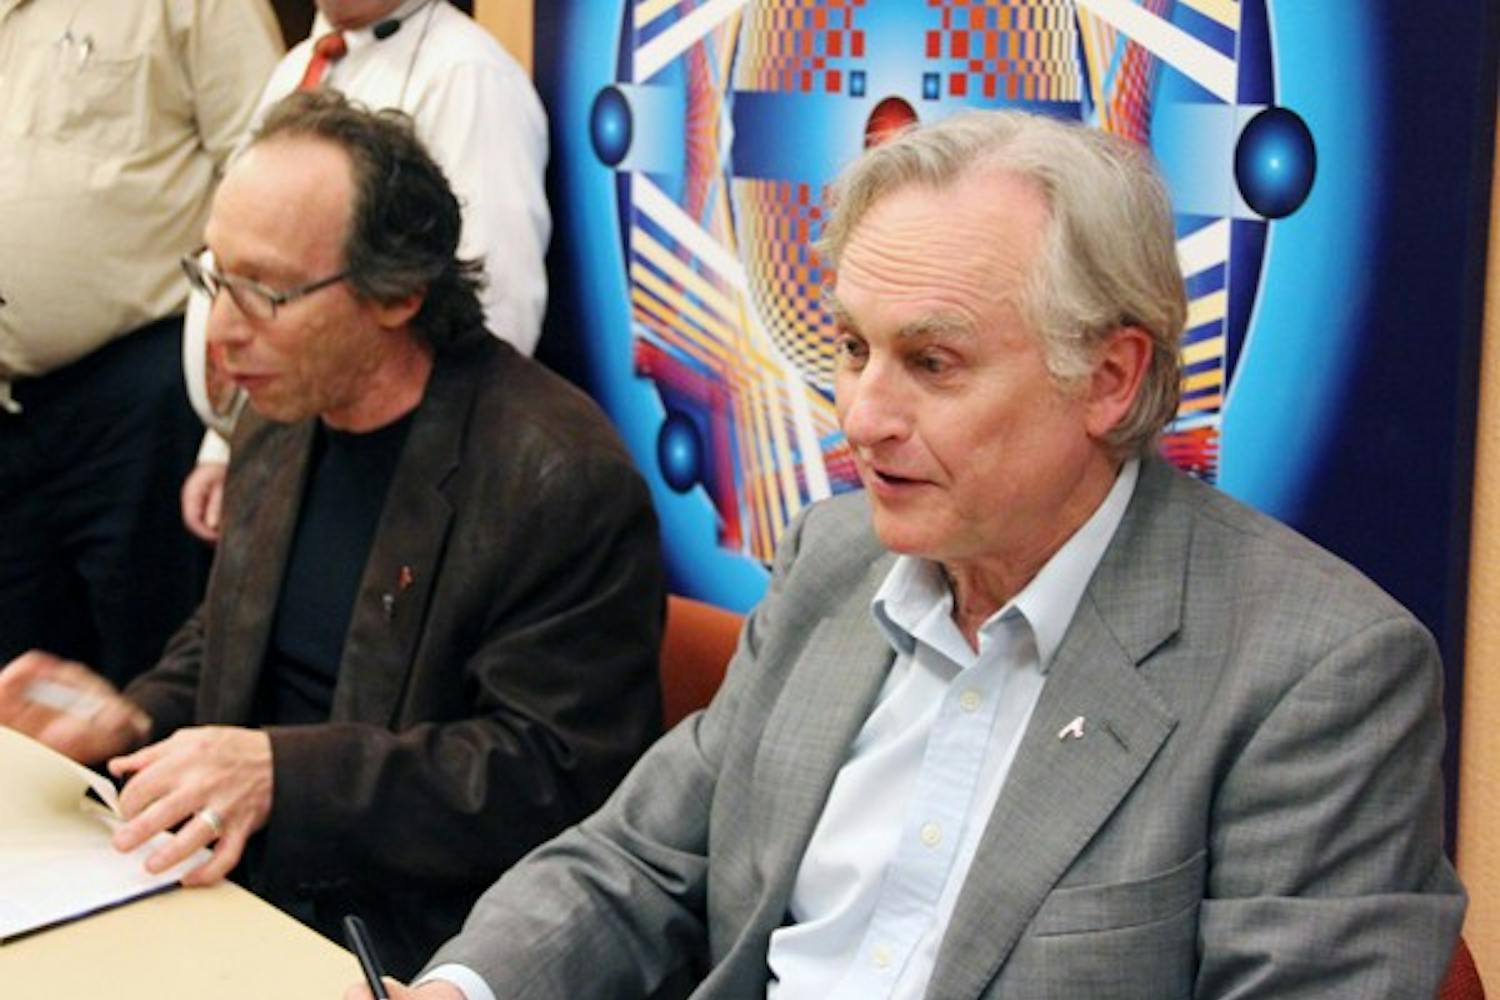 Richard Dawkins, right, and Lawrence Krauss, left, sign books at the "Something From Nothing?" event. (Photo by Diana Lustig)